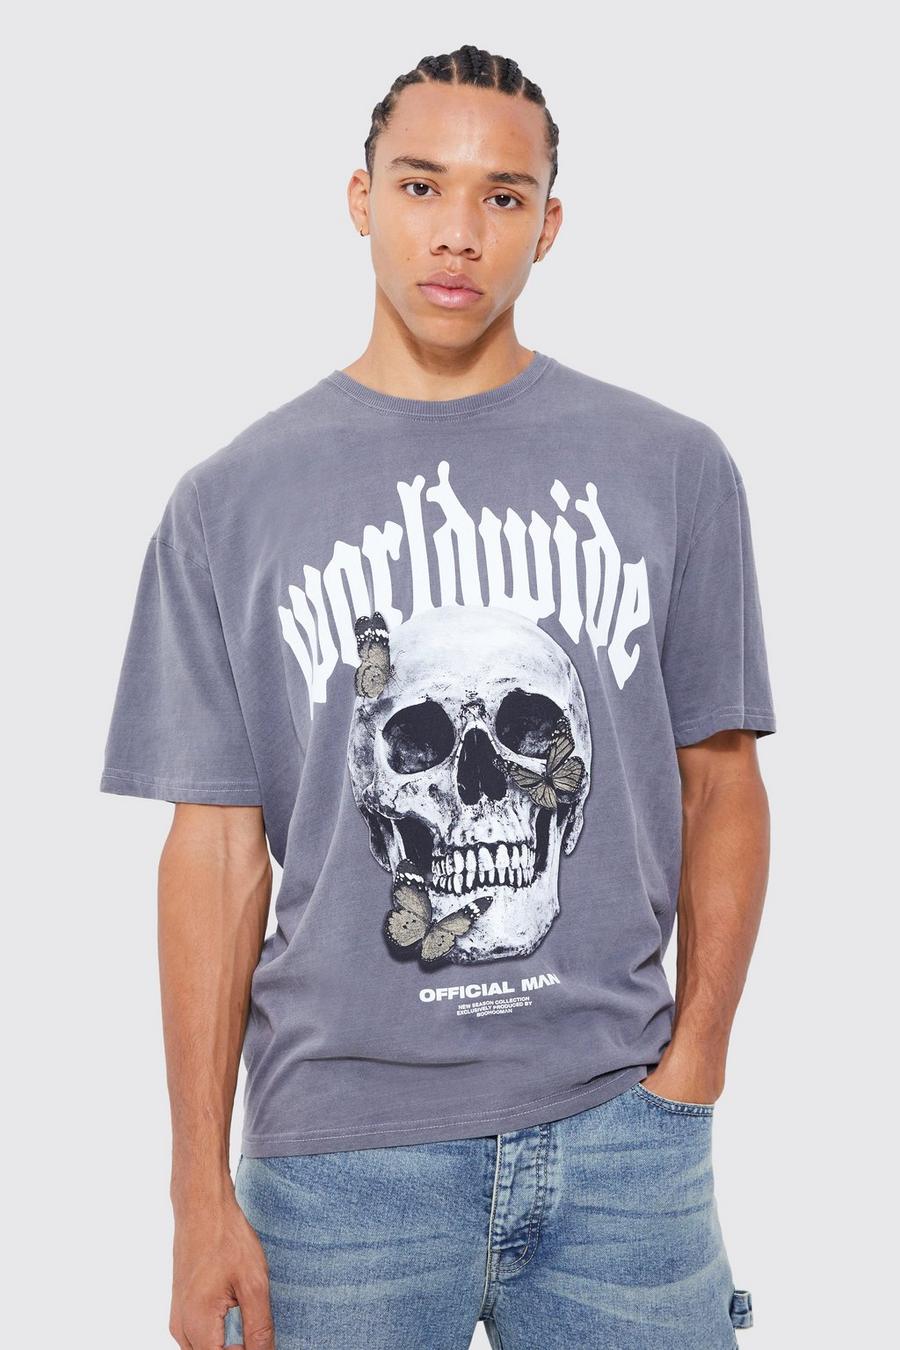 Charcoal grey Tall Oversized Washed Butterfly Skull T-shirt